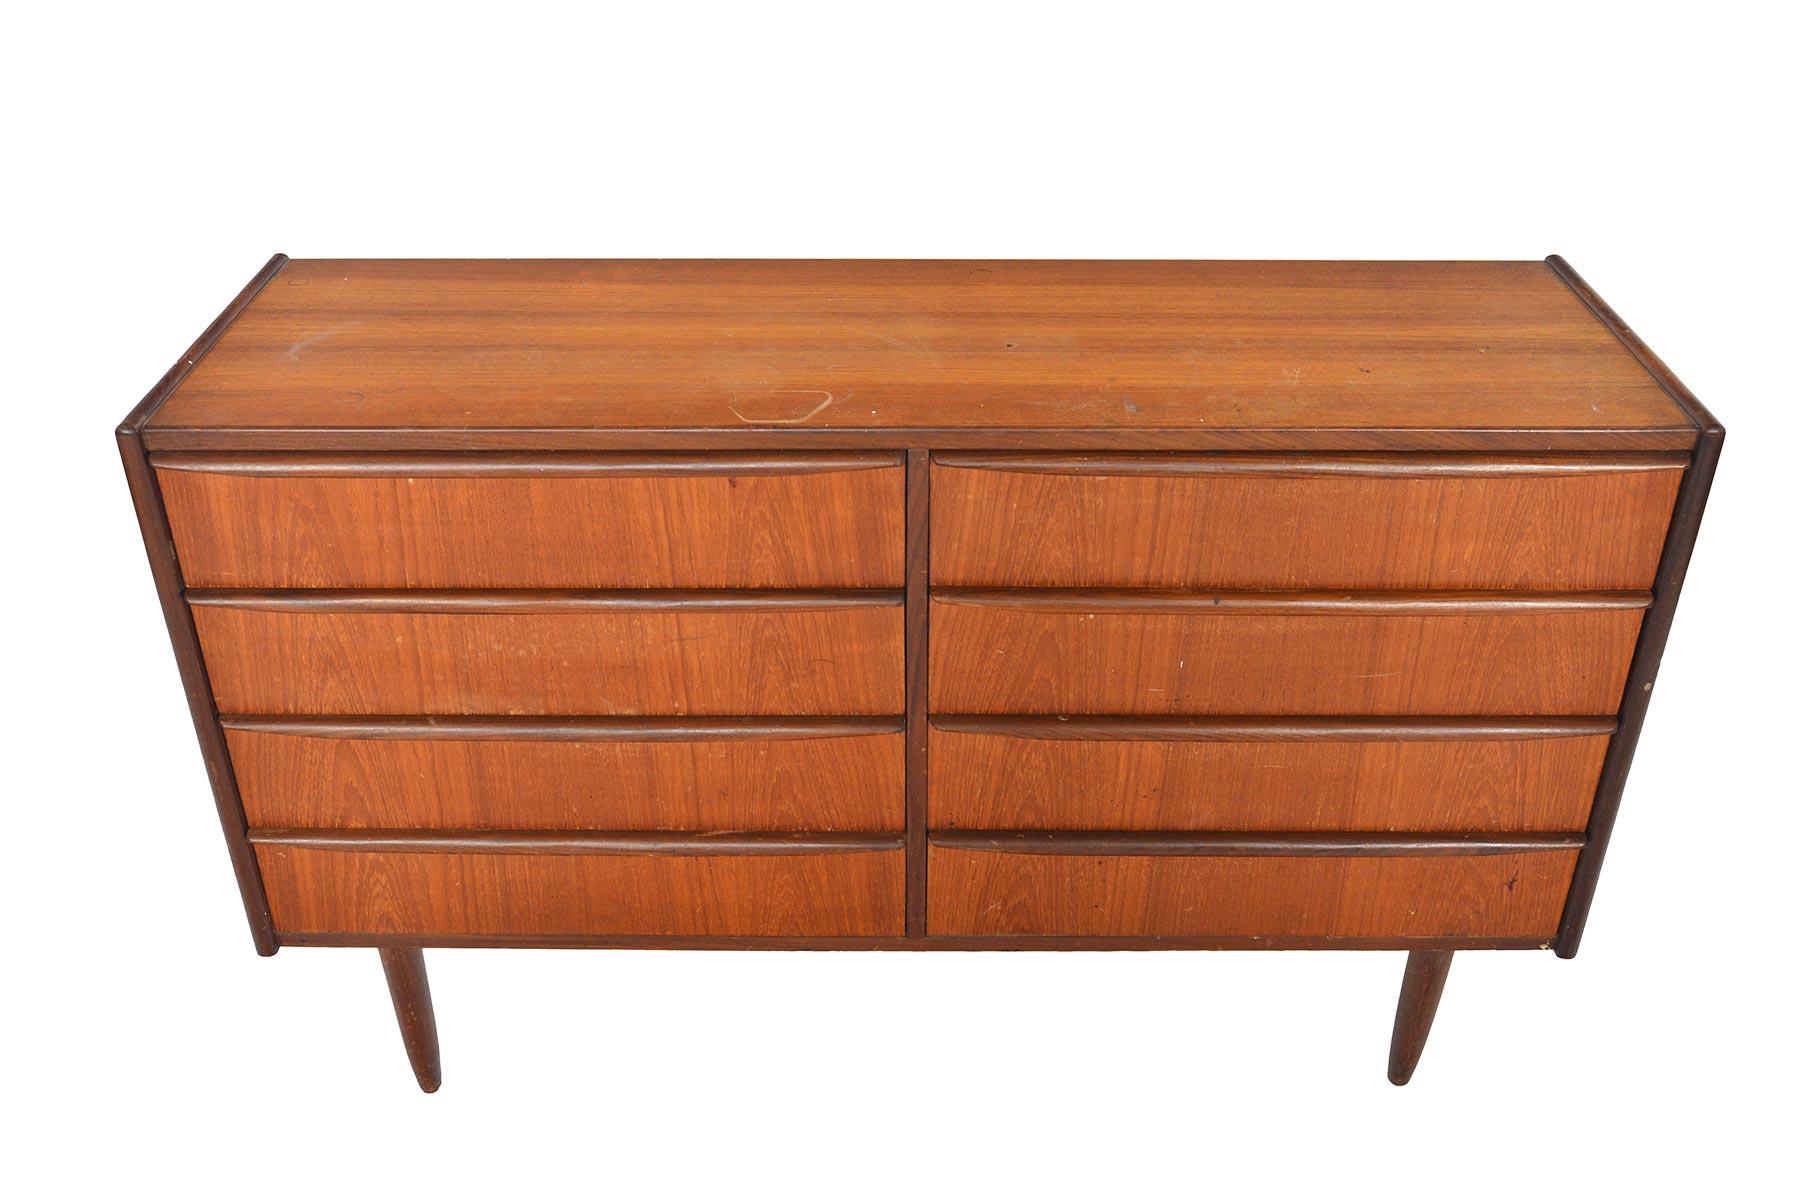 Origin: Denmark
Designer: Unknown
Manufacturer: Unknown
Era: 1960s
Dimensions: 50.5 wide x 16 deep x 31 tall 
Drawer interiors 23 wide x 13 deep x 4.5 tall

Price includes restoration

Restoration includes:
• Structural and joint repair